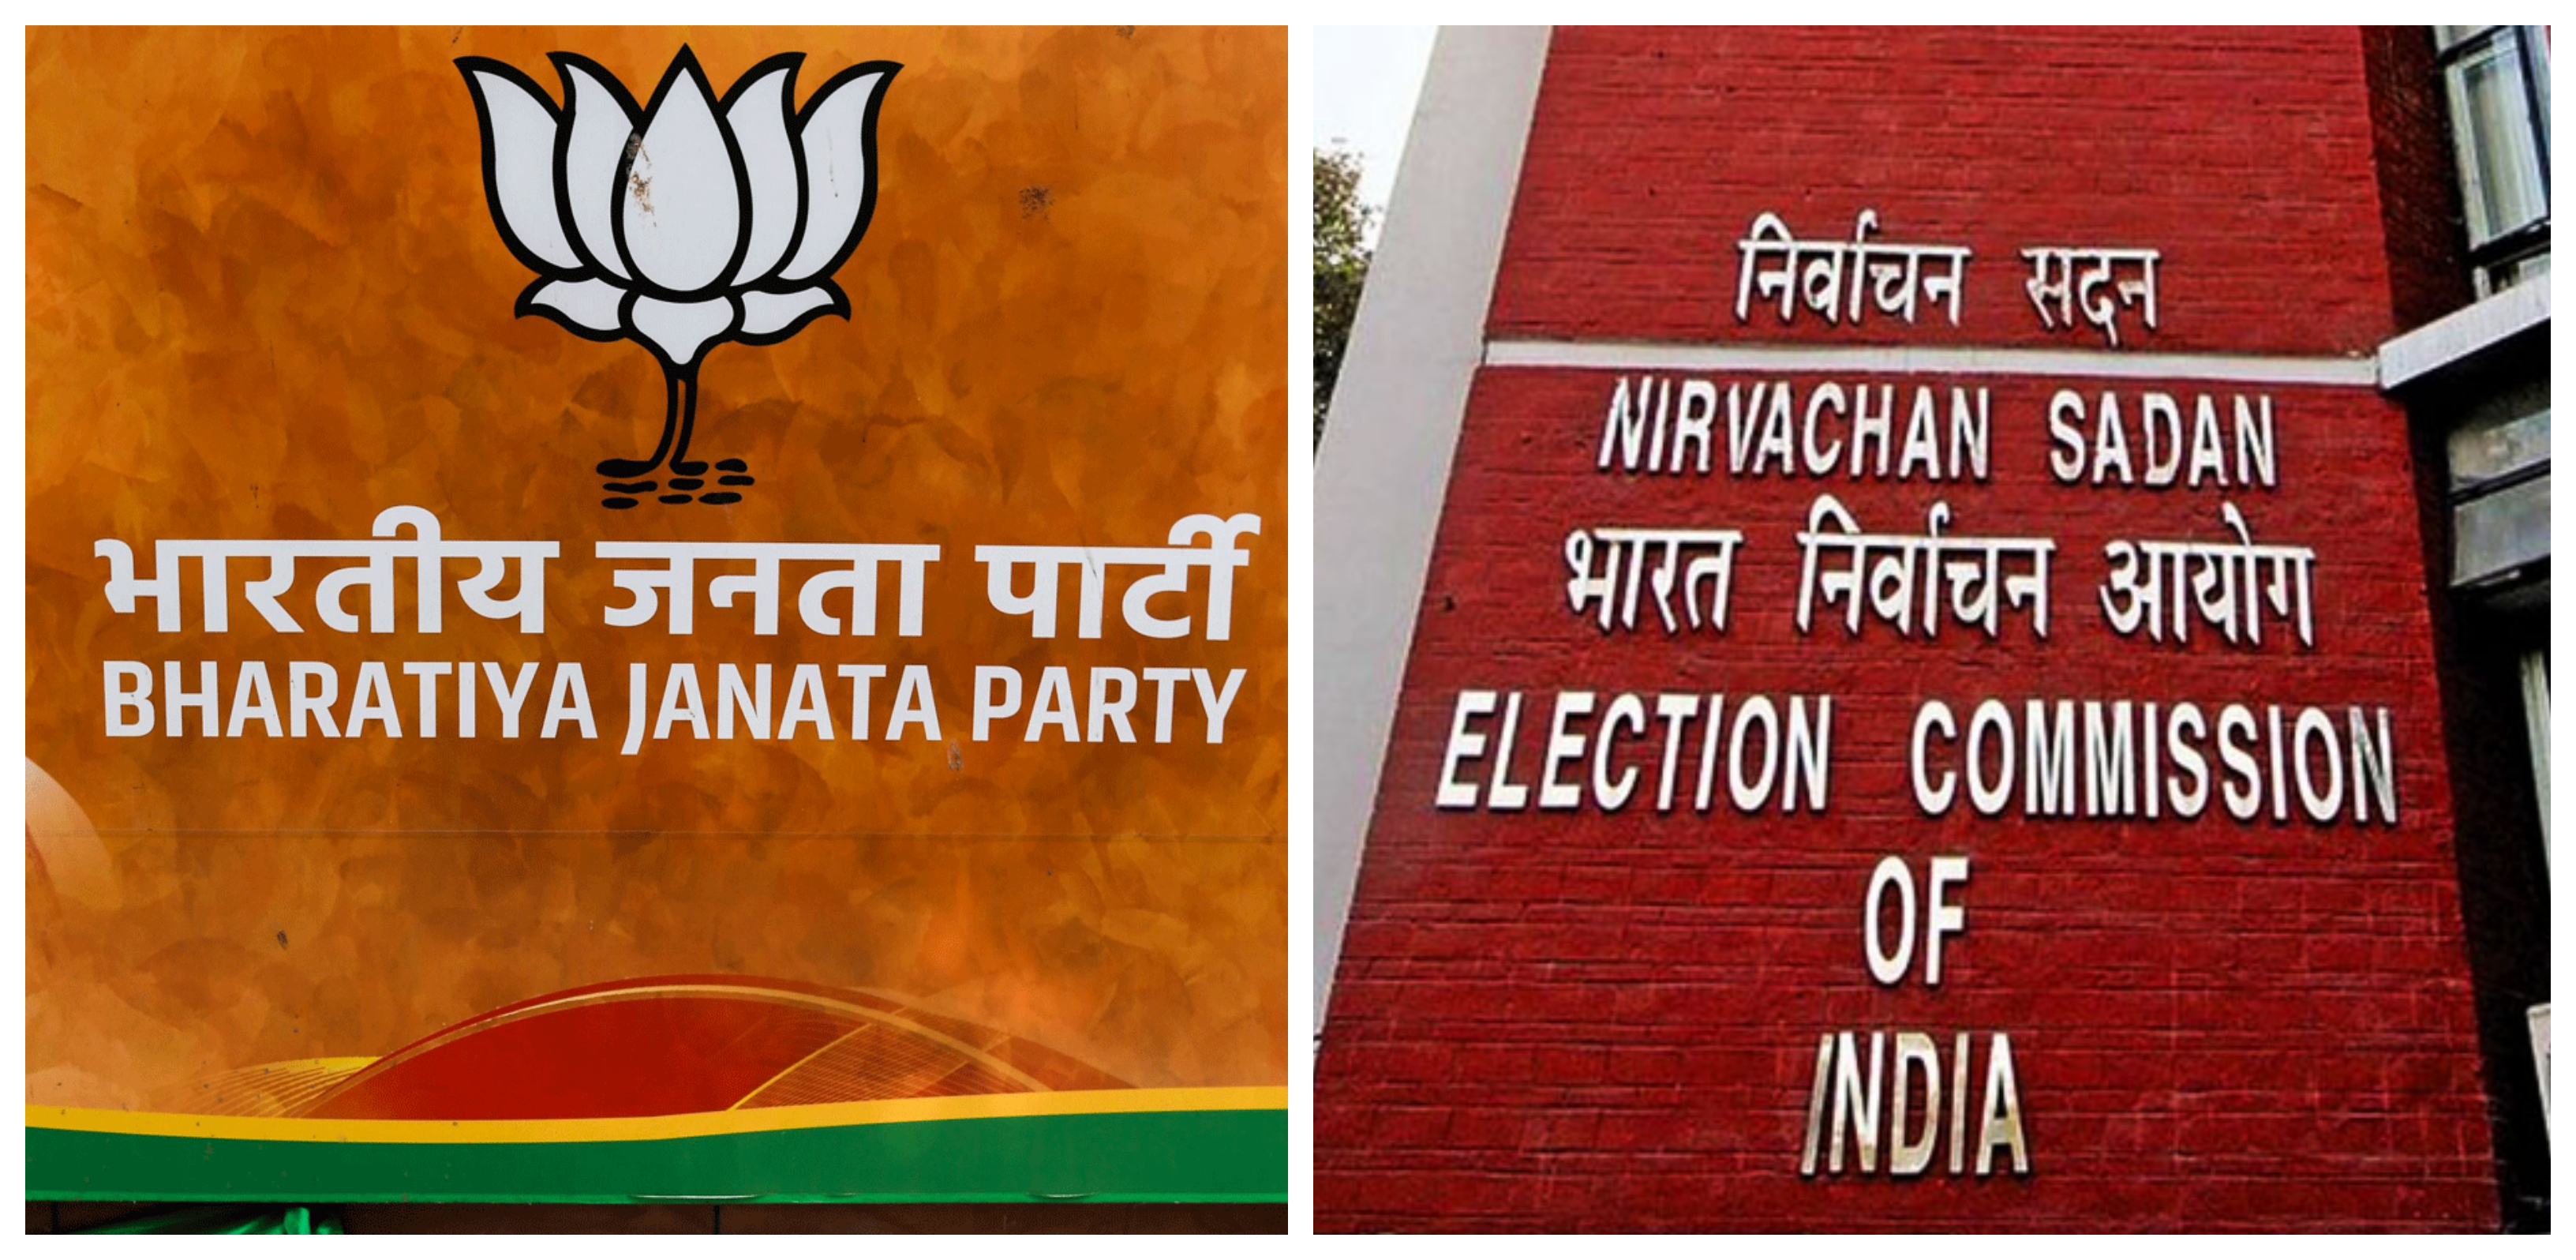 Evident That Voters Personal Details May Have Been Obtained By BJP & Put To Use For Campaign Purposes: Madras High Court